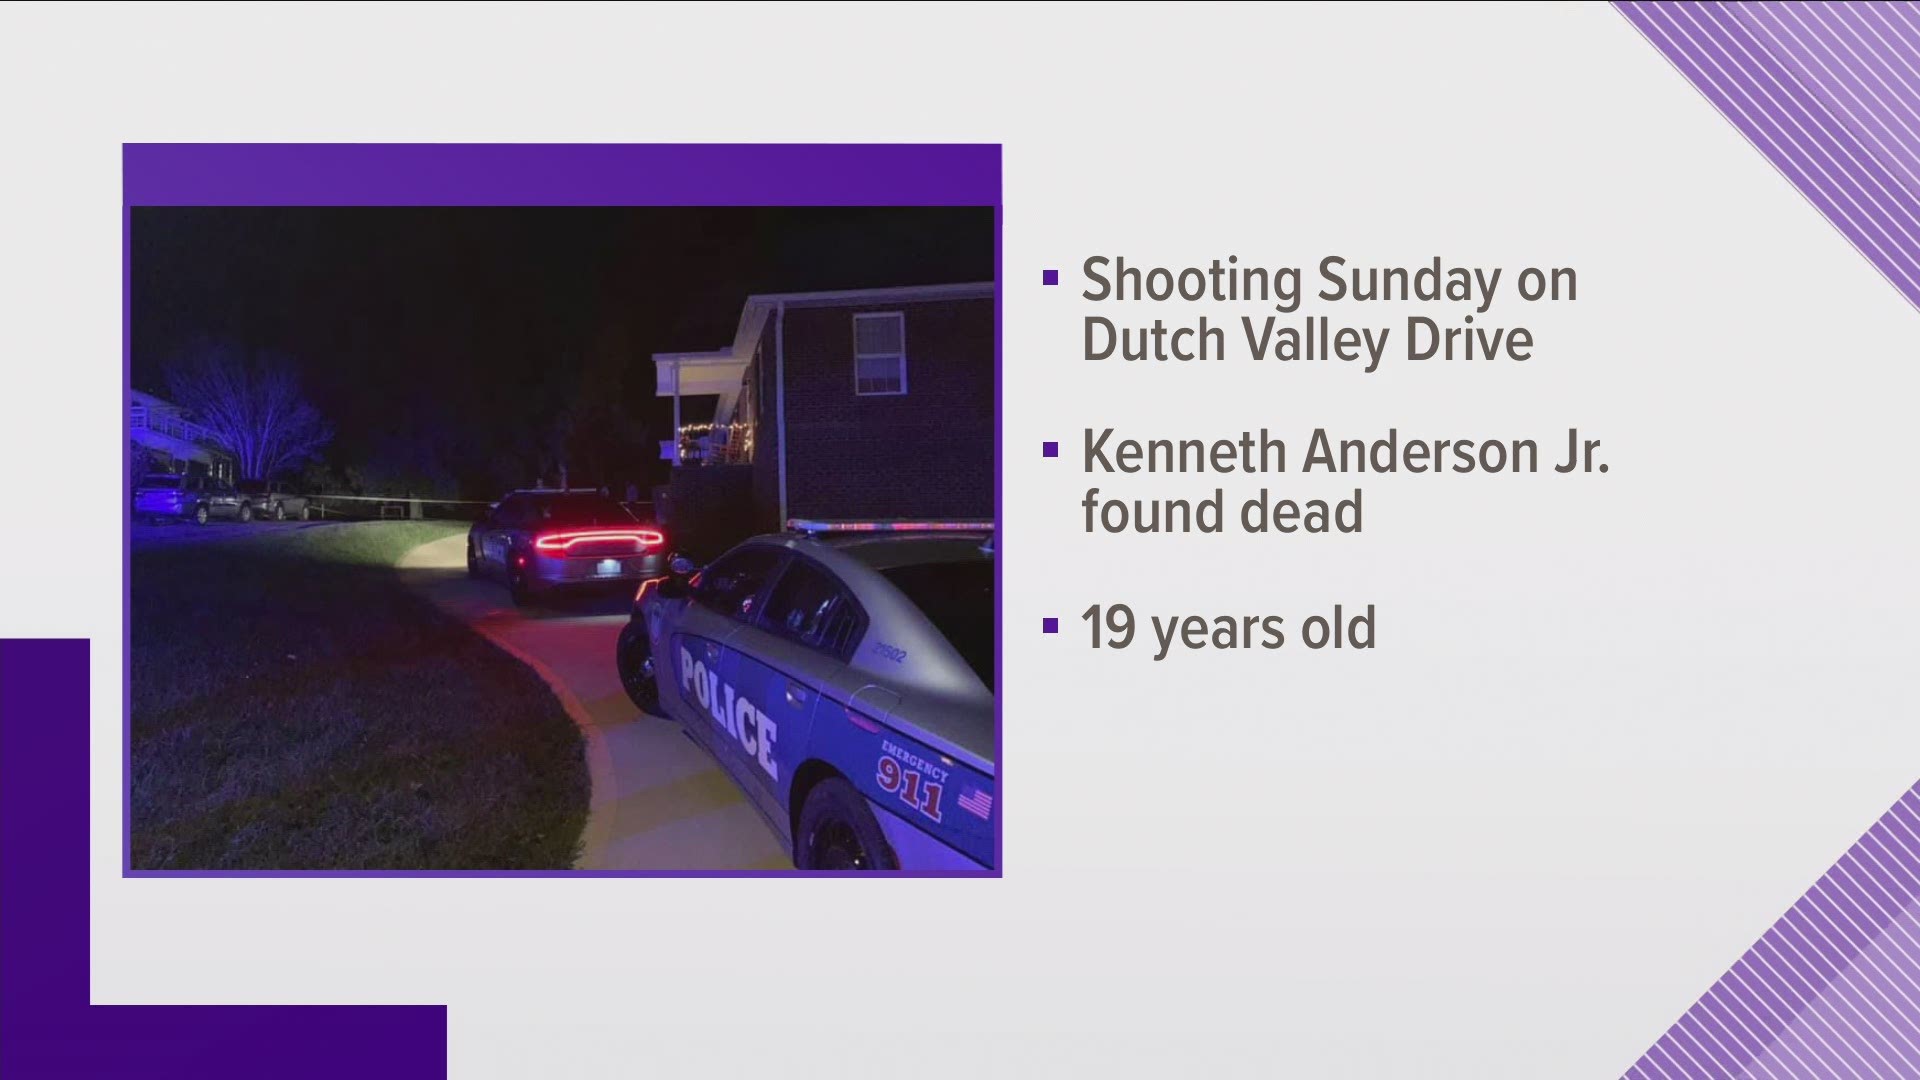 Police say 19-year-old Kenneth Anderson Jr. died in the shooting Sunday on Dutch Valley Drive.